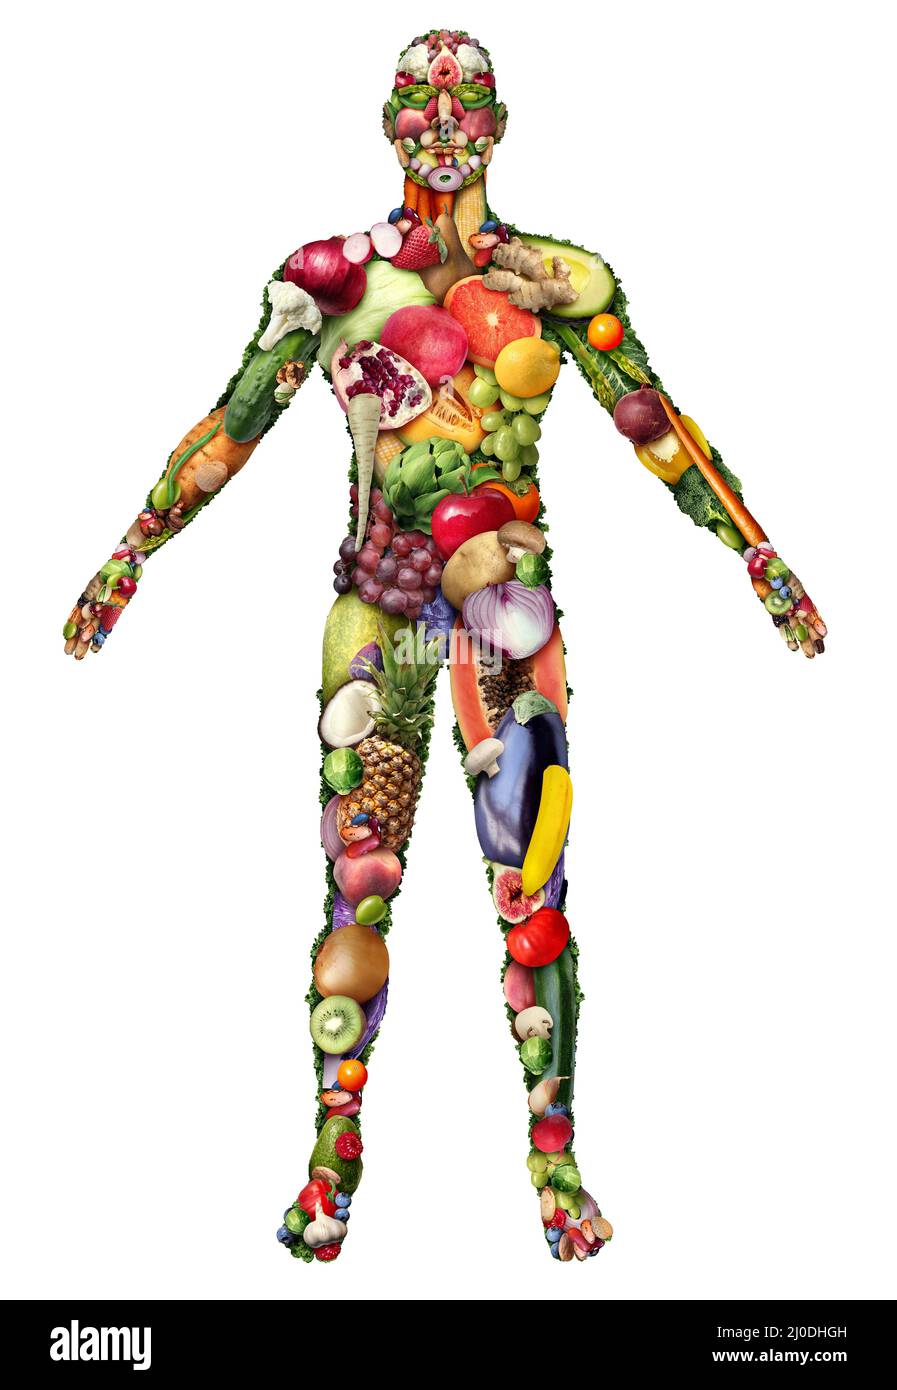 Human body made of fruit and vegetables and eating healthy or vegan and veganism or natural diet lifestyle as a group of fresh ripe fruits and nuts. Stock Photo